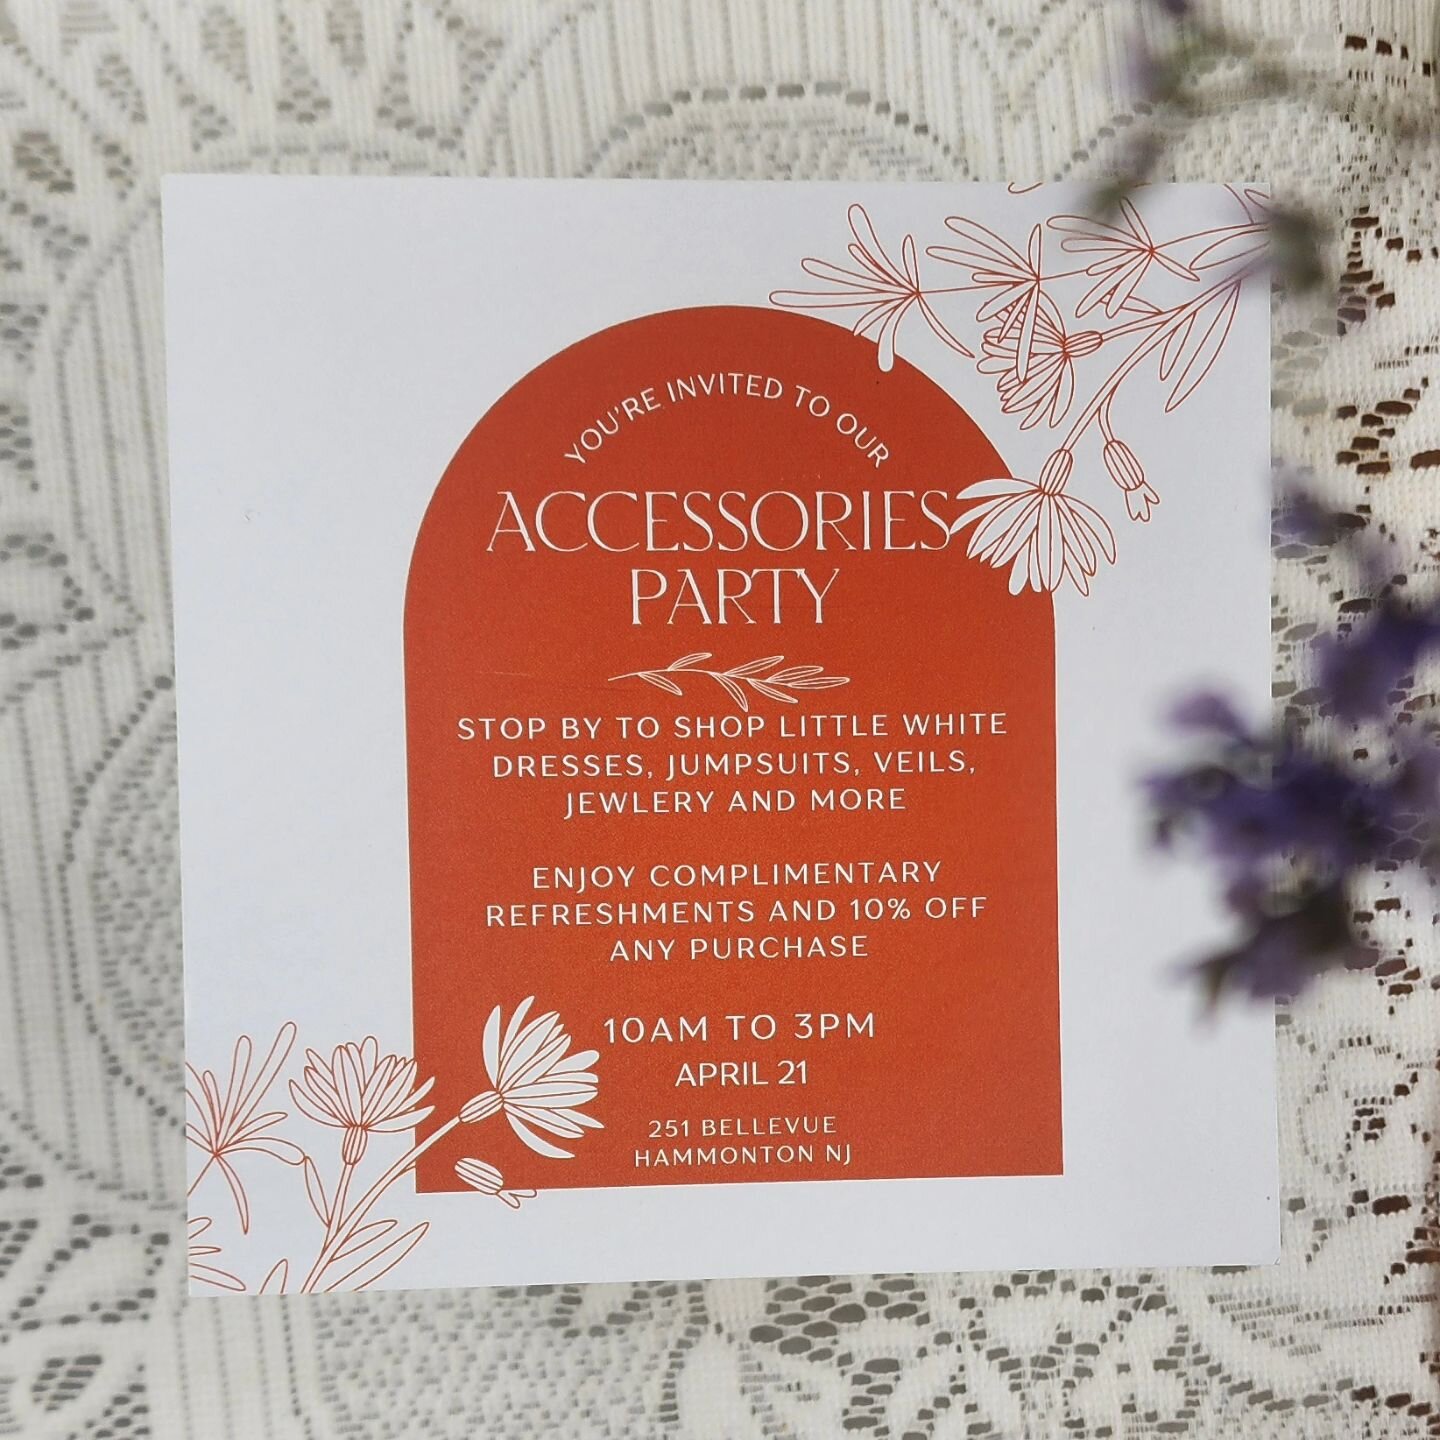 If you said yes recently, maybe you already got one of our invites! Spring has sprung and it's time to celebrate 🤍🌸 

Stop by our beautiful pre-owned designer wedding boutique in @downtown.hammonton any time between 10pm and 3pm on the 21st to brow